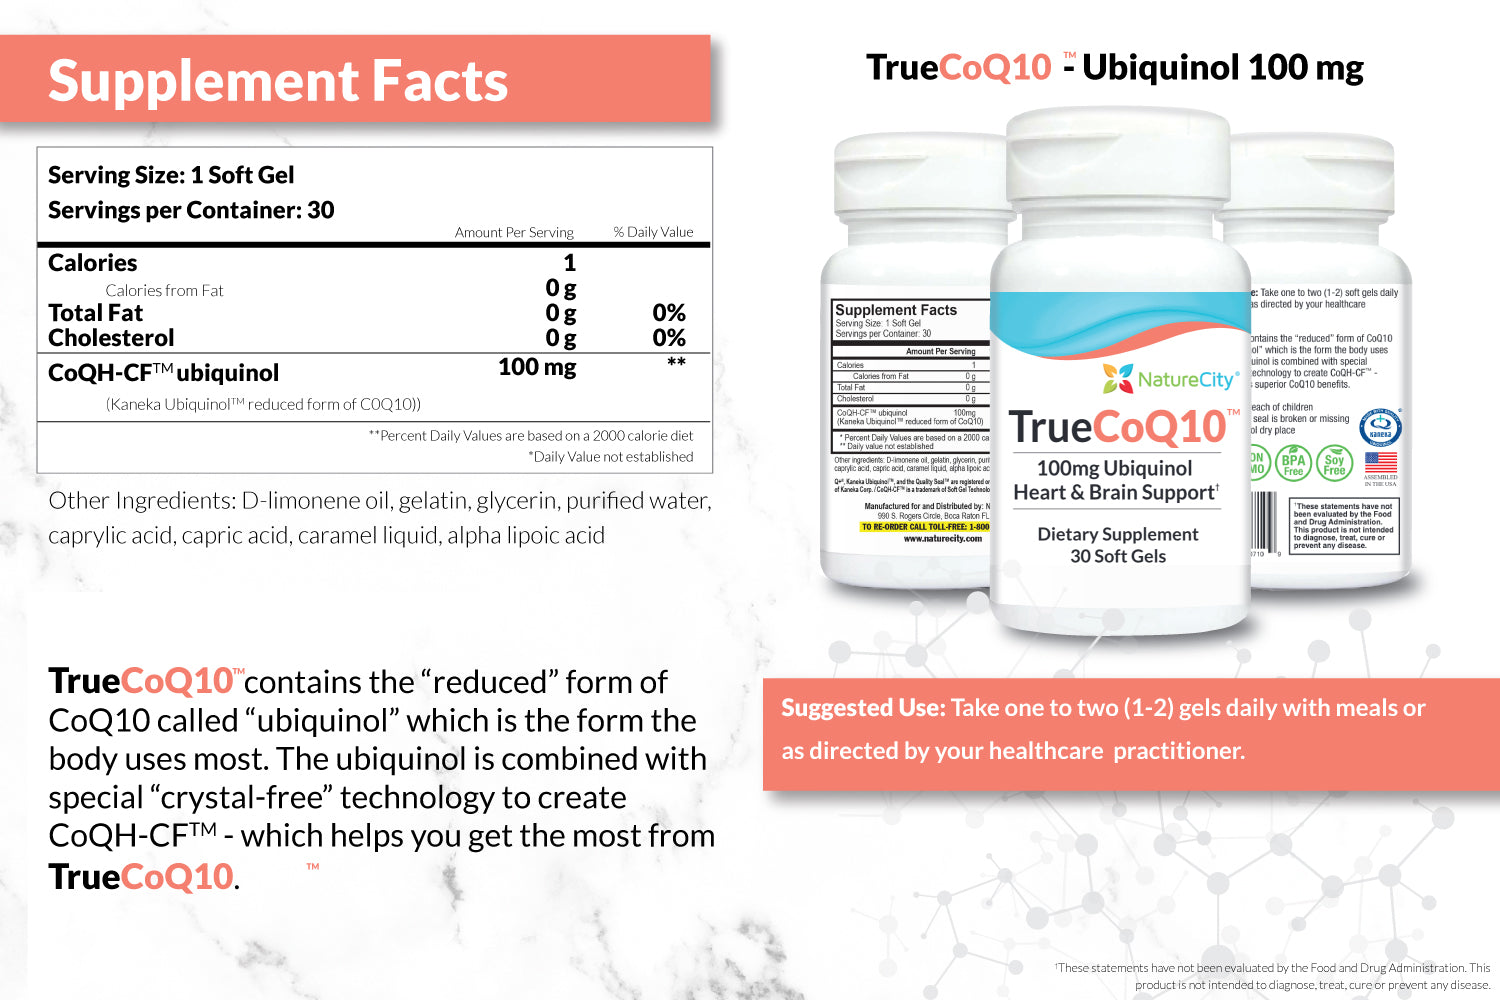 TrueCoQ10 Stabilized Supplement Facts and Suggested Use